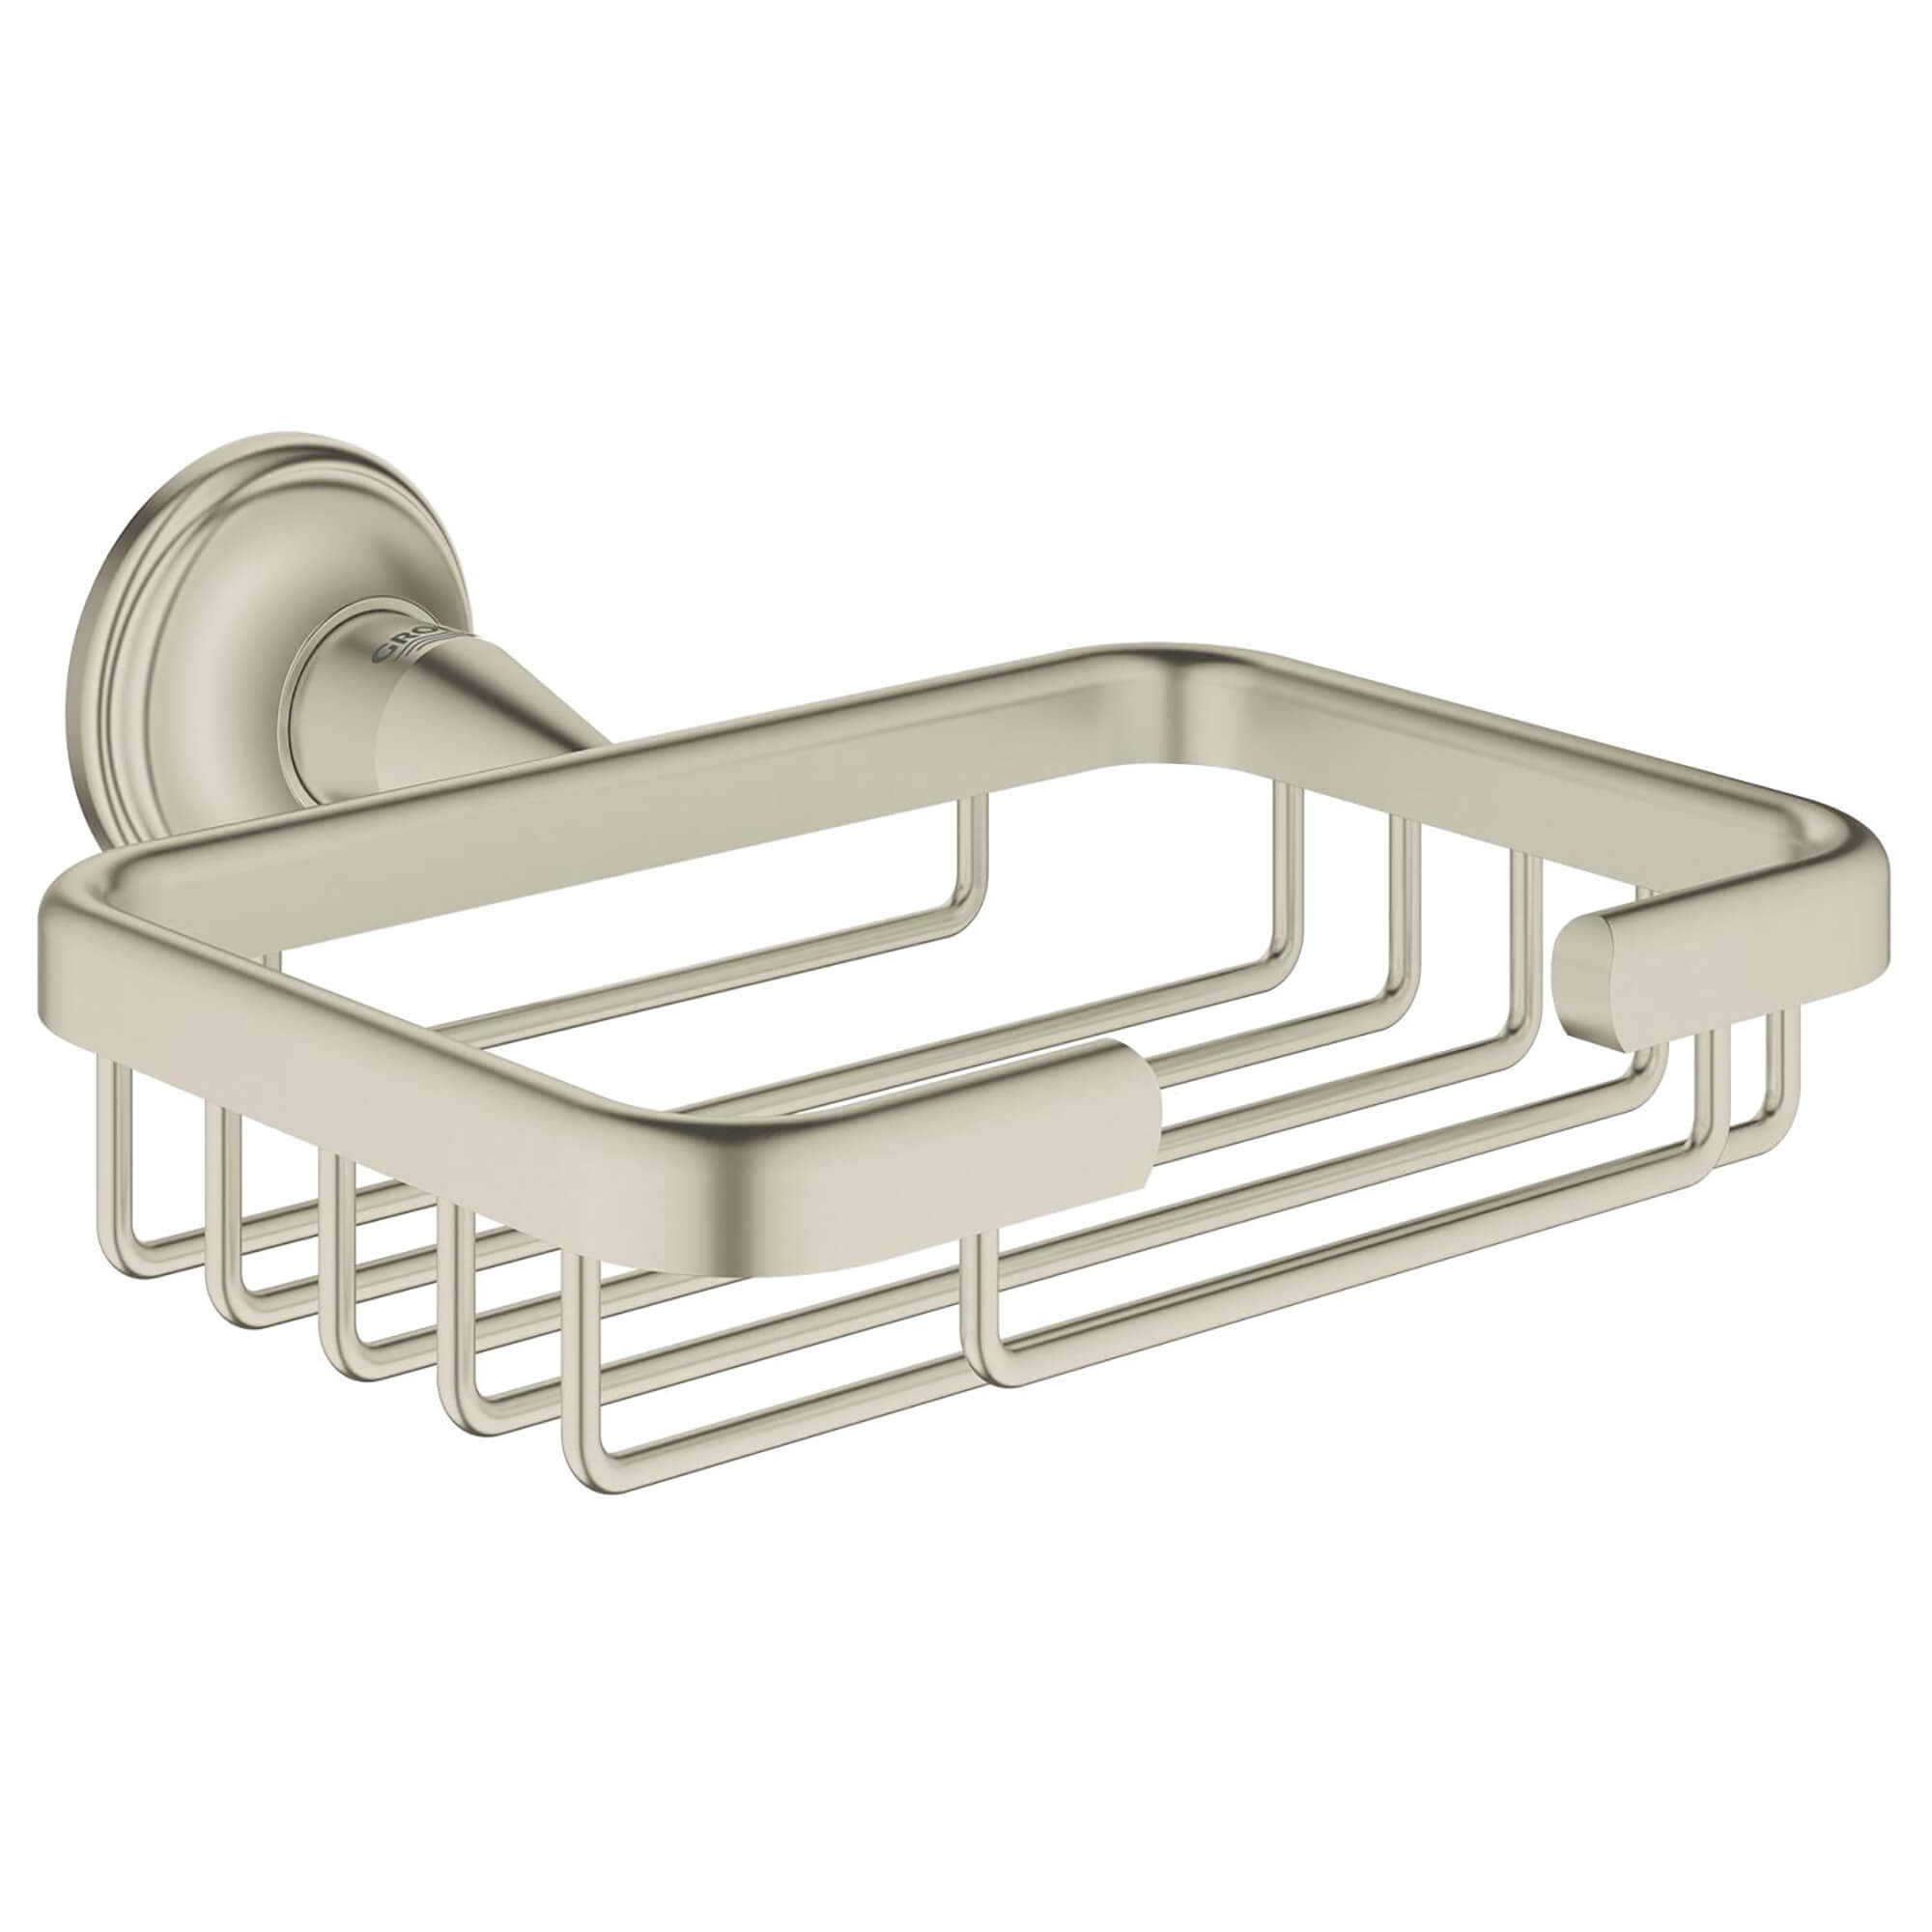 Essentials Authentic Filing Basket GROHE BRUSHED NICKEL